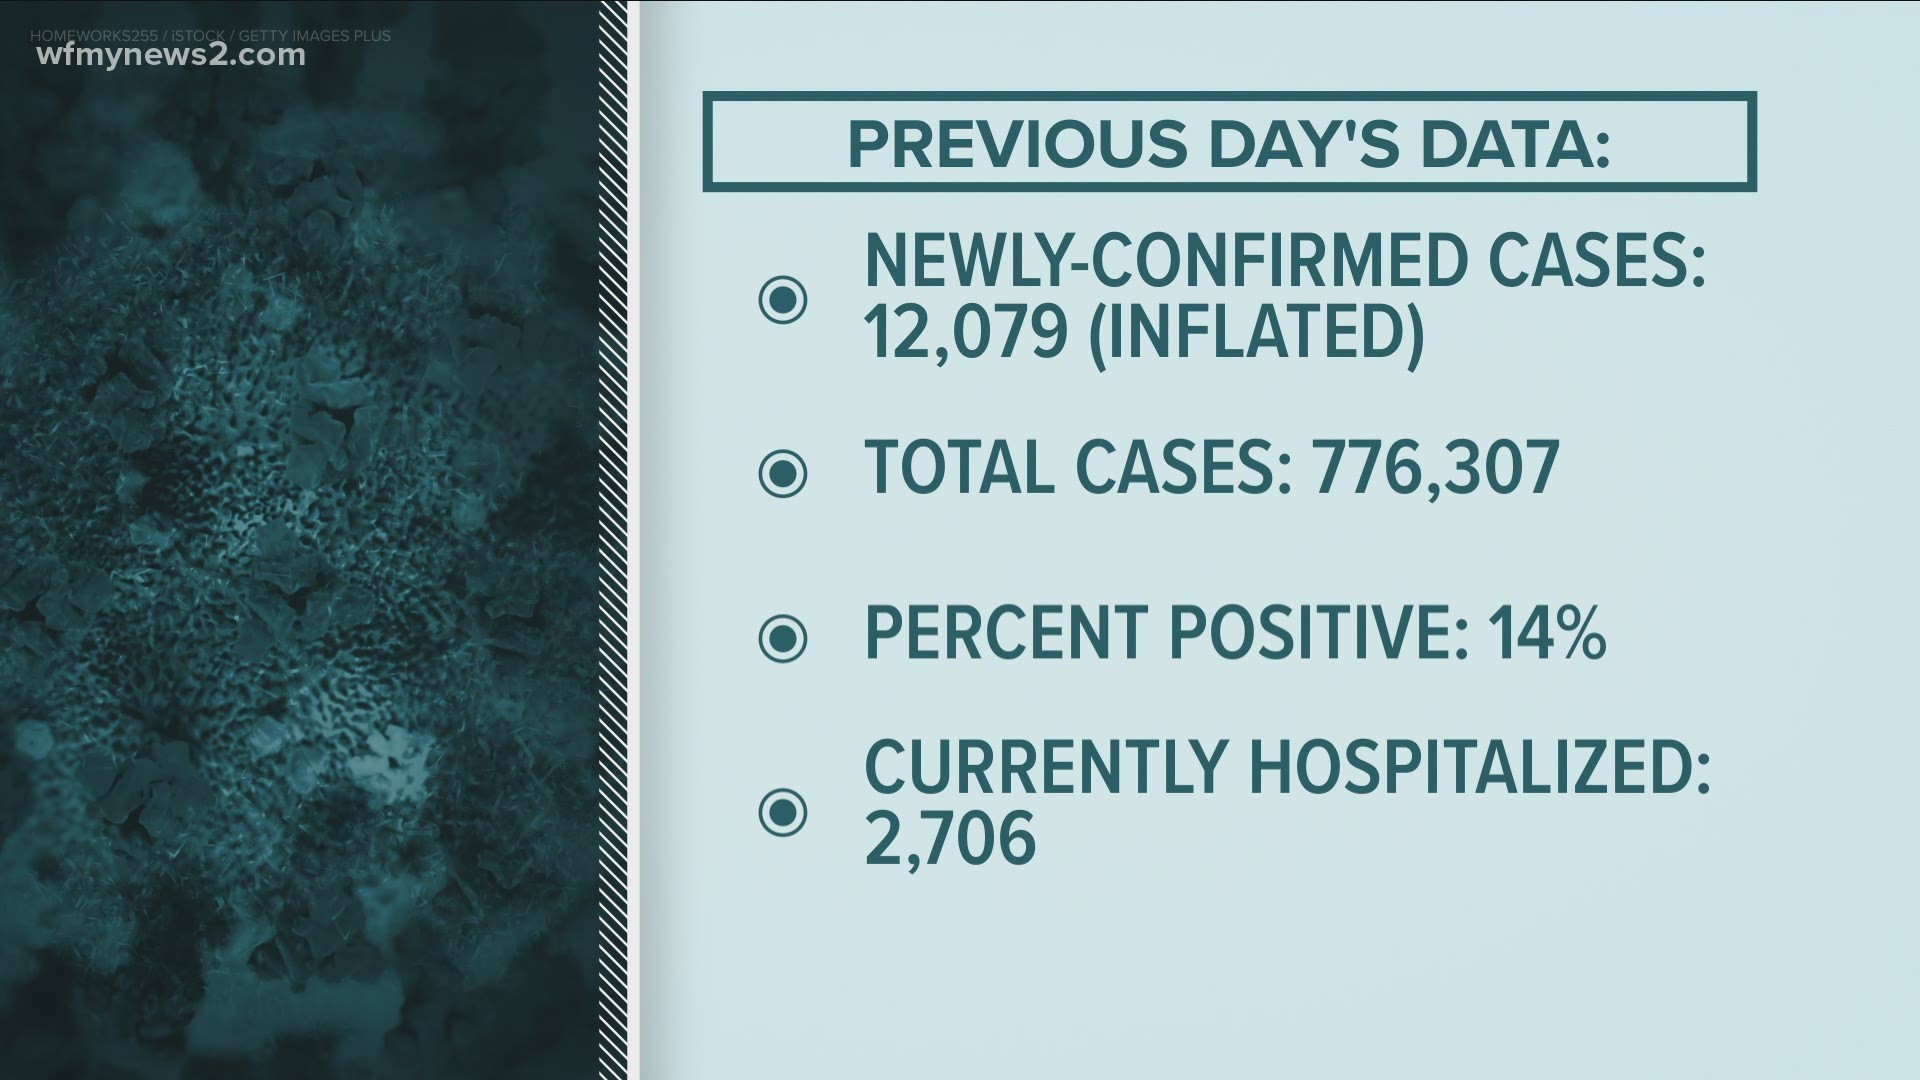 NCDHHS explained more than 7,000 FastMed urgent care cases over two months got lumped into Wednesday’s case count.